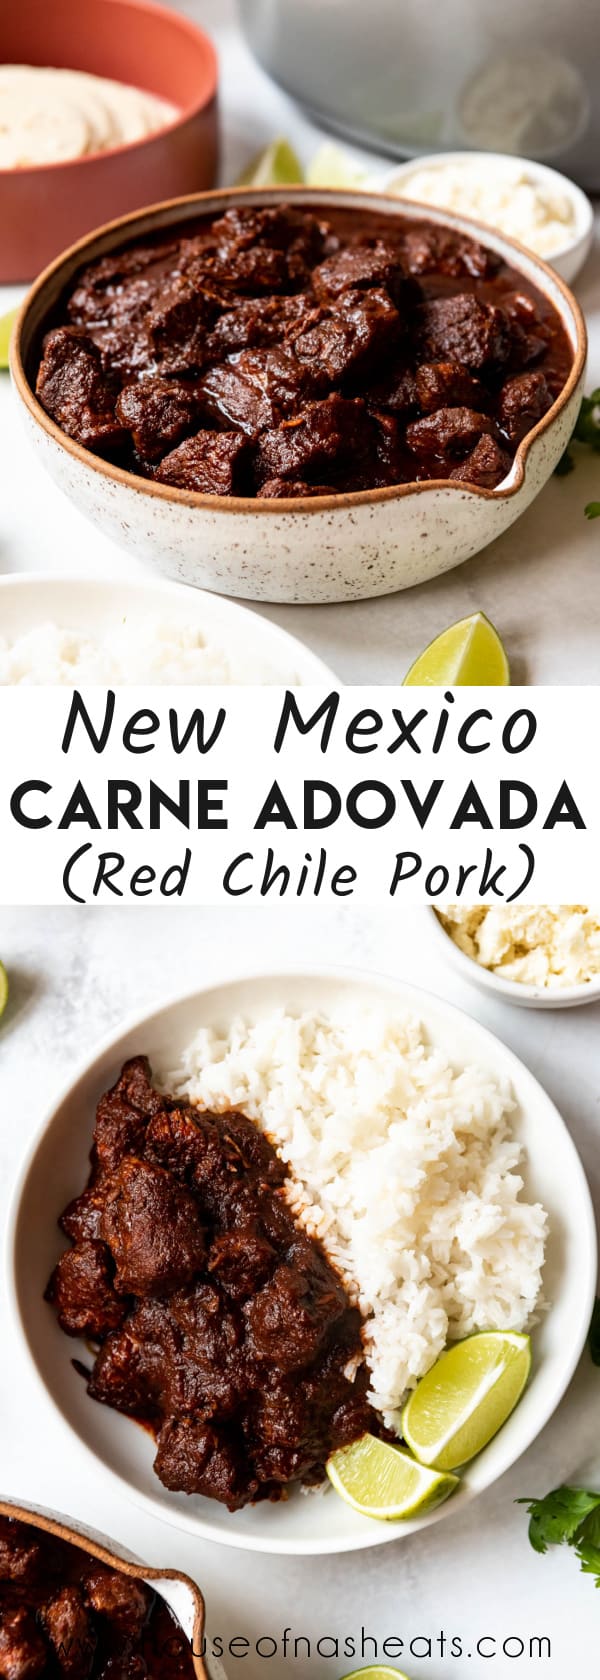 A collage of images of carne adovada with text overlay.